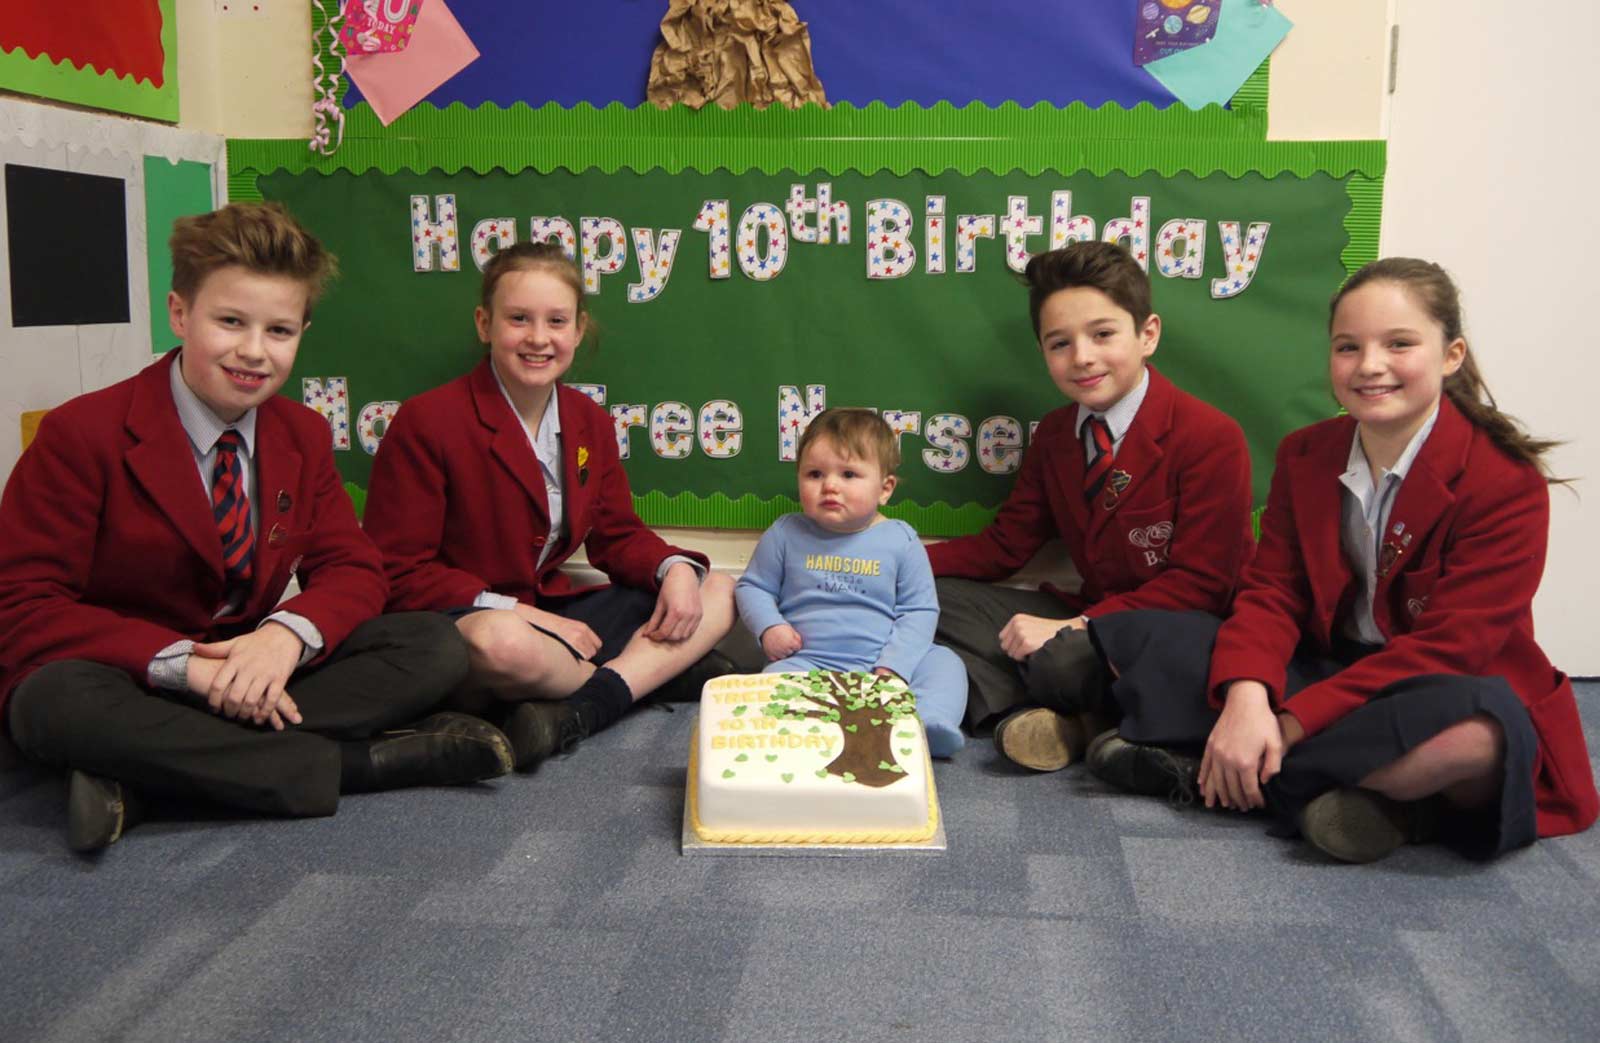 Belmont Grosvenor School pupils Perry Palmer, Mary Huber, Freddie Fothergill and Anna Garnett with Magic Tree Nursery youngster Harrison Rowe